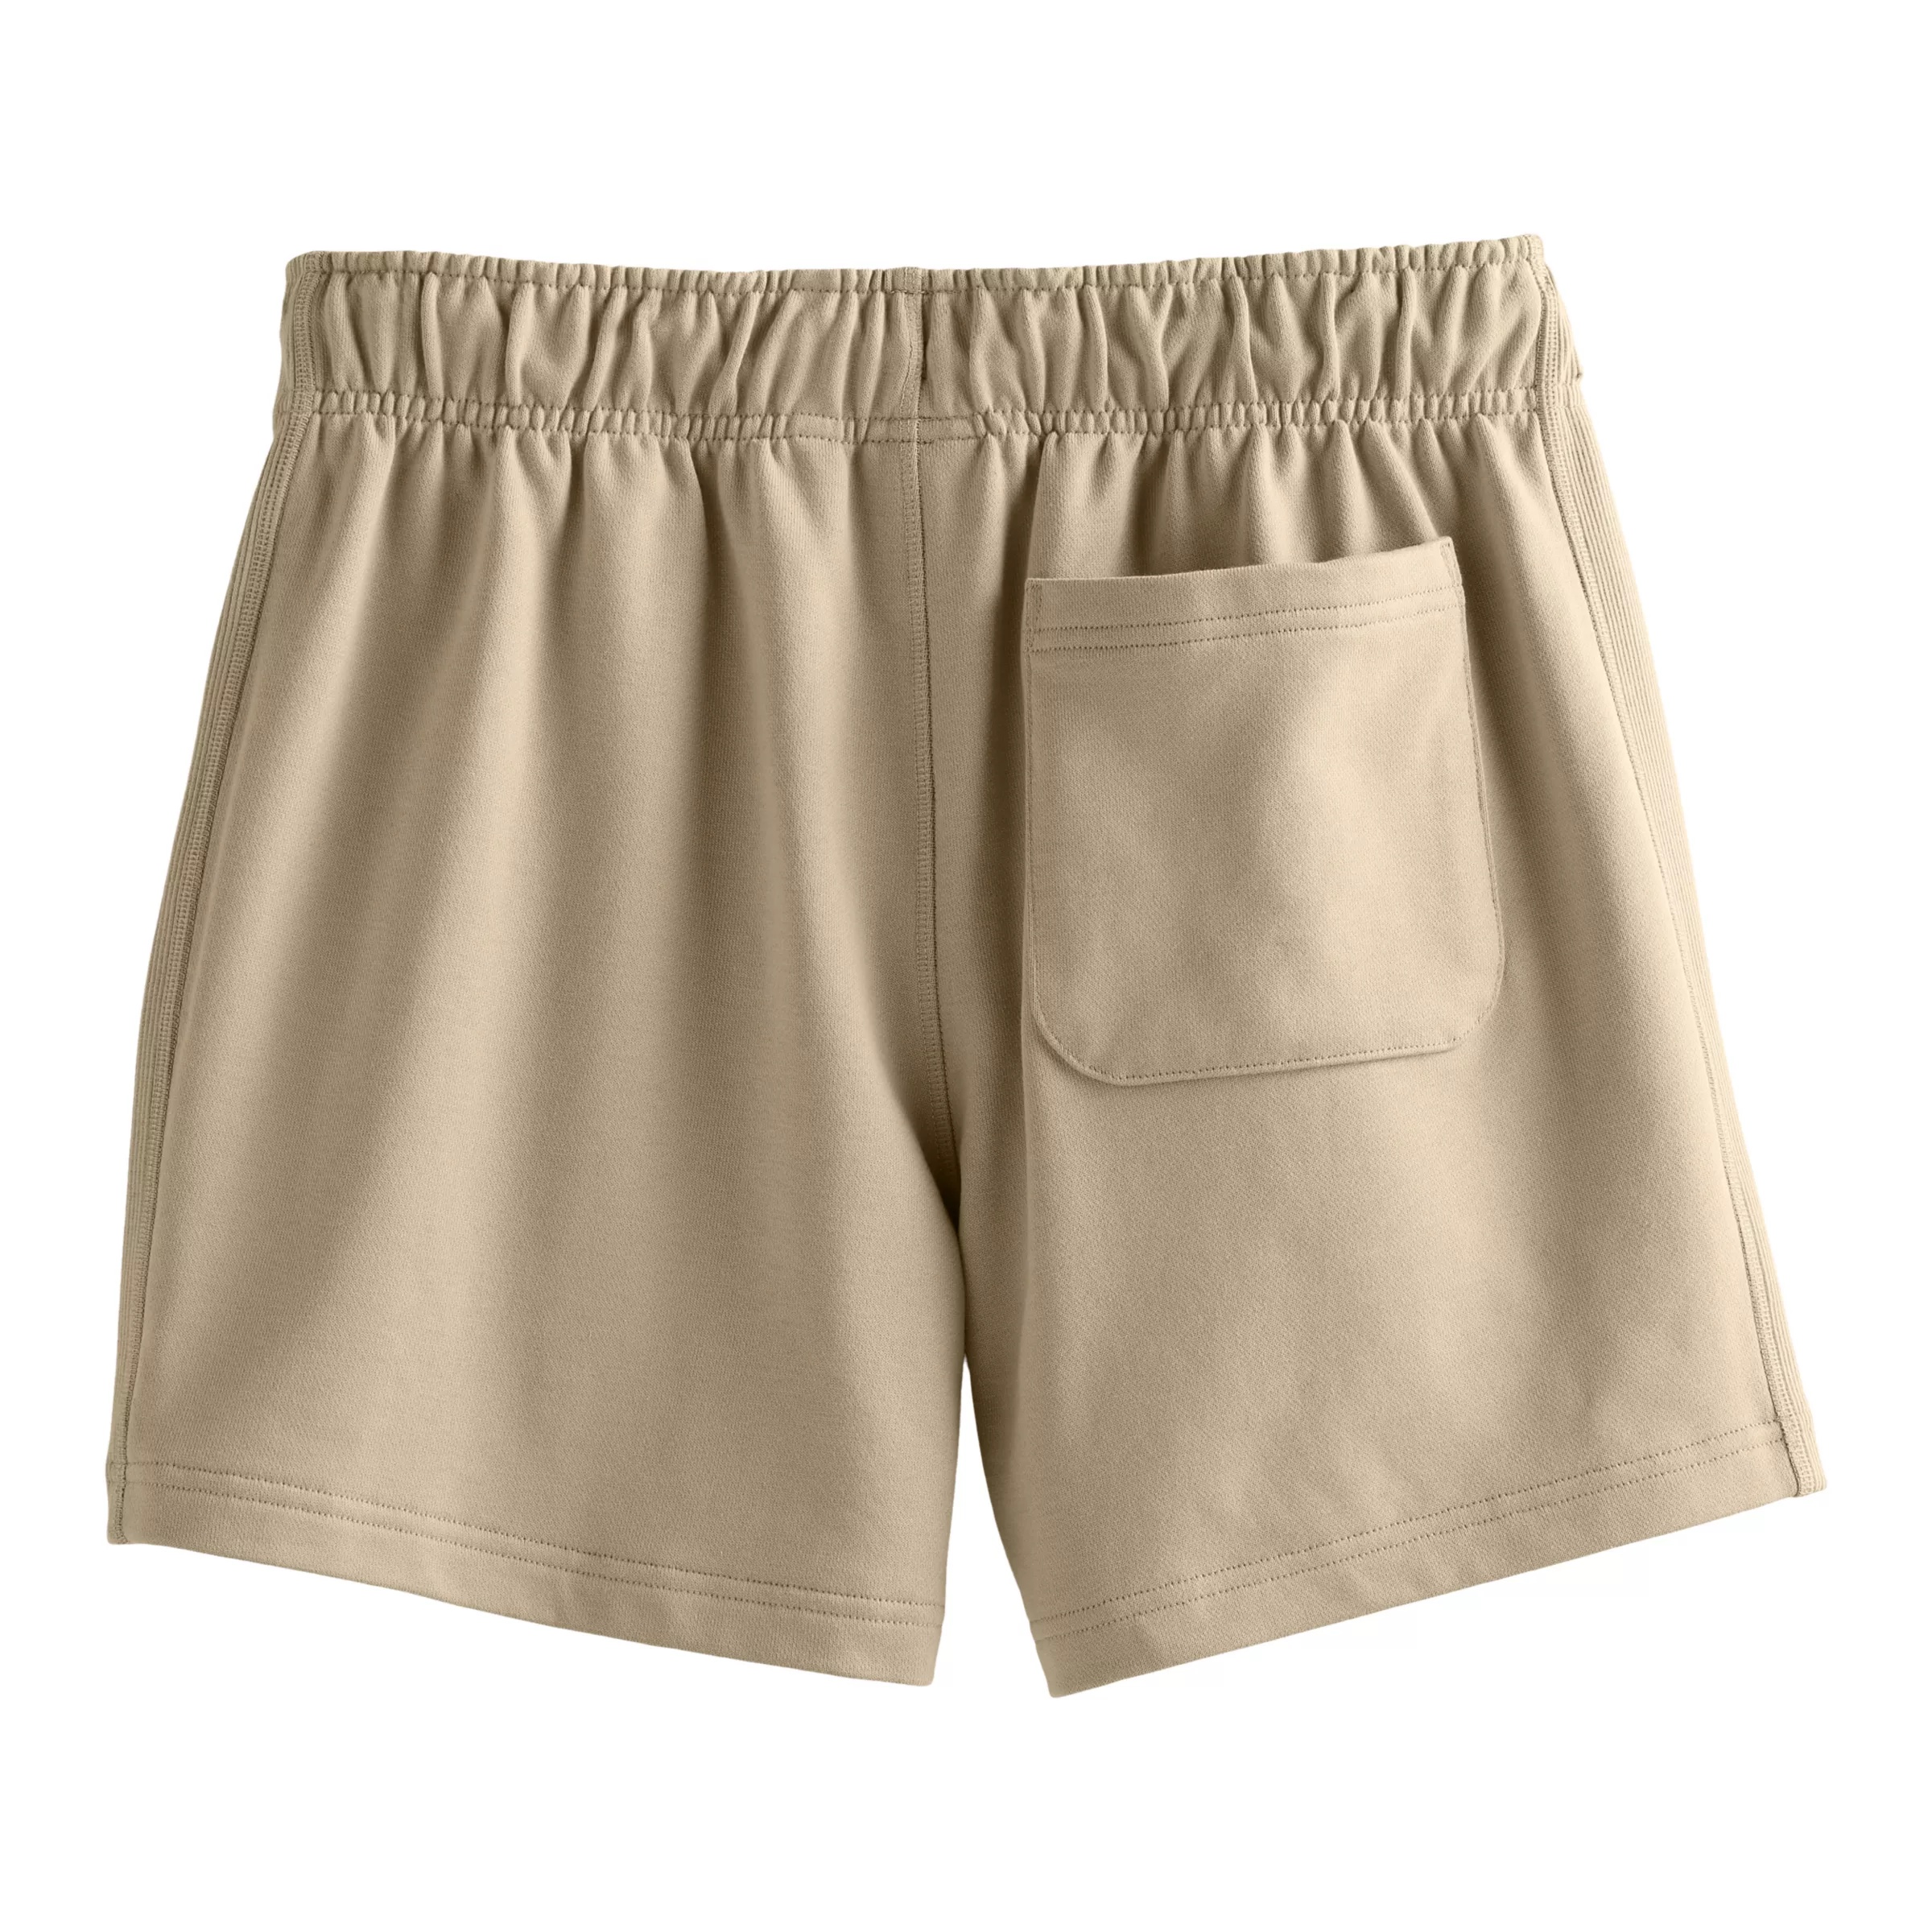 Athletics French Terry Short 5" - 3